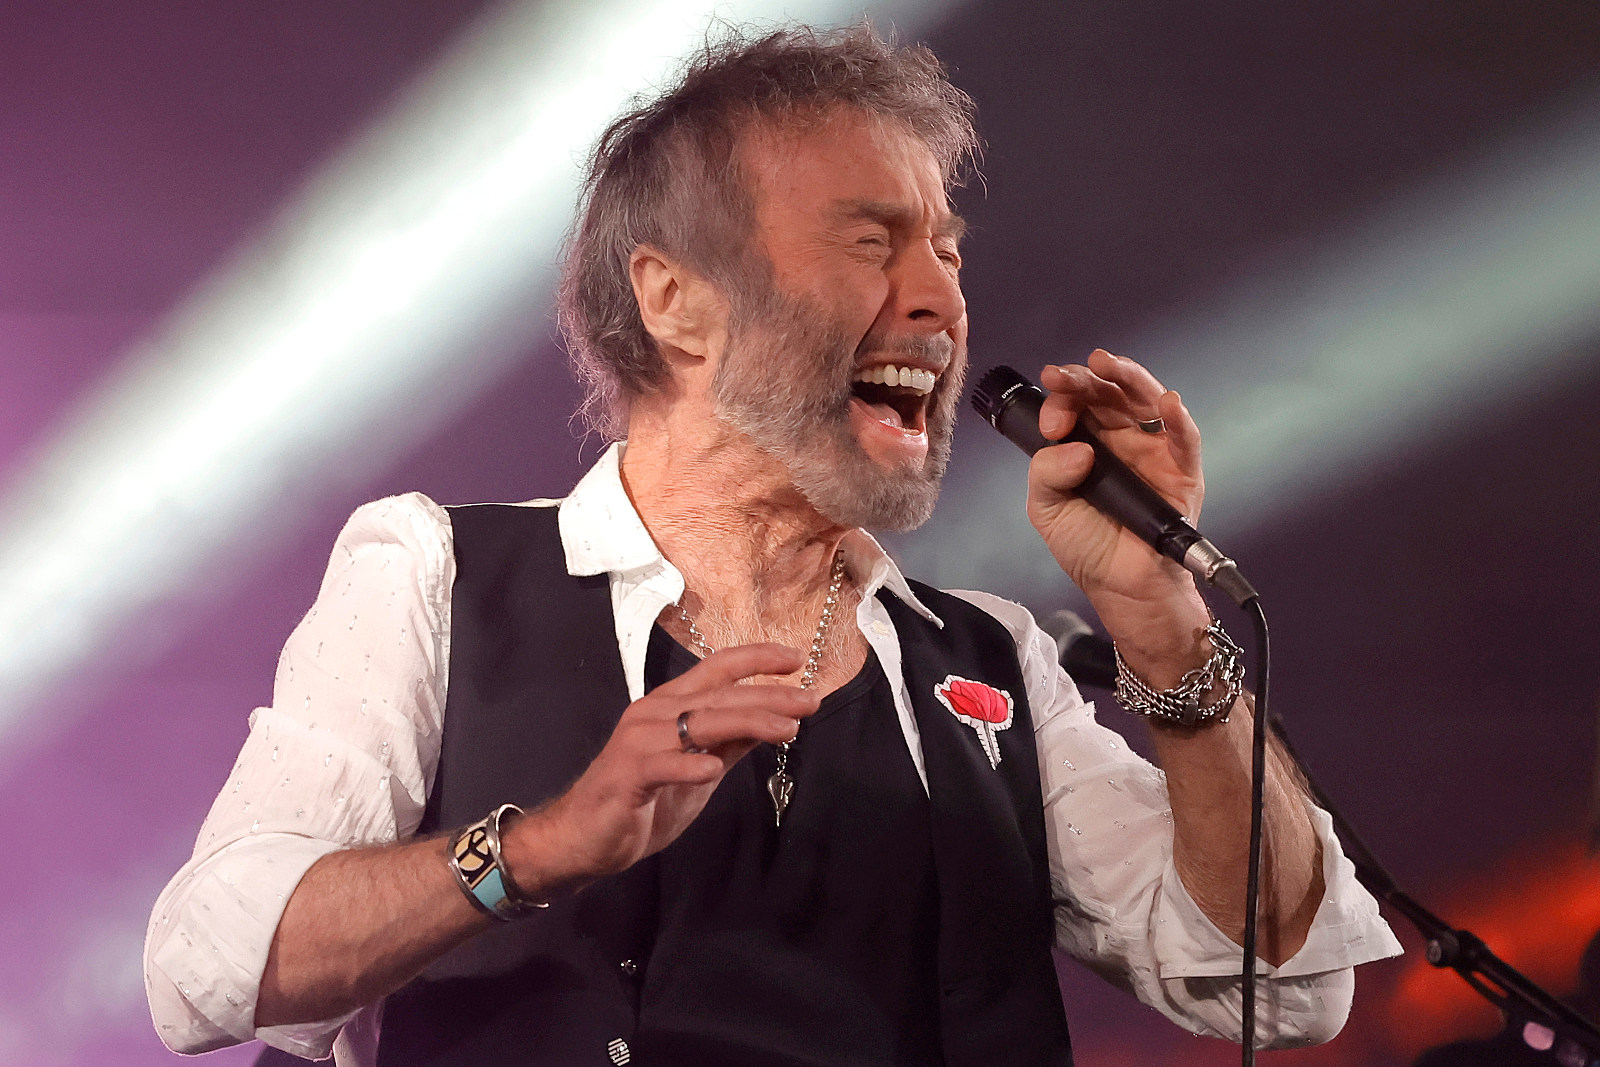 Why Paul Rodgers Didn’t Perform ‘All Right Now’ for 18 Years